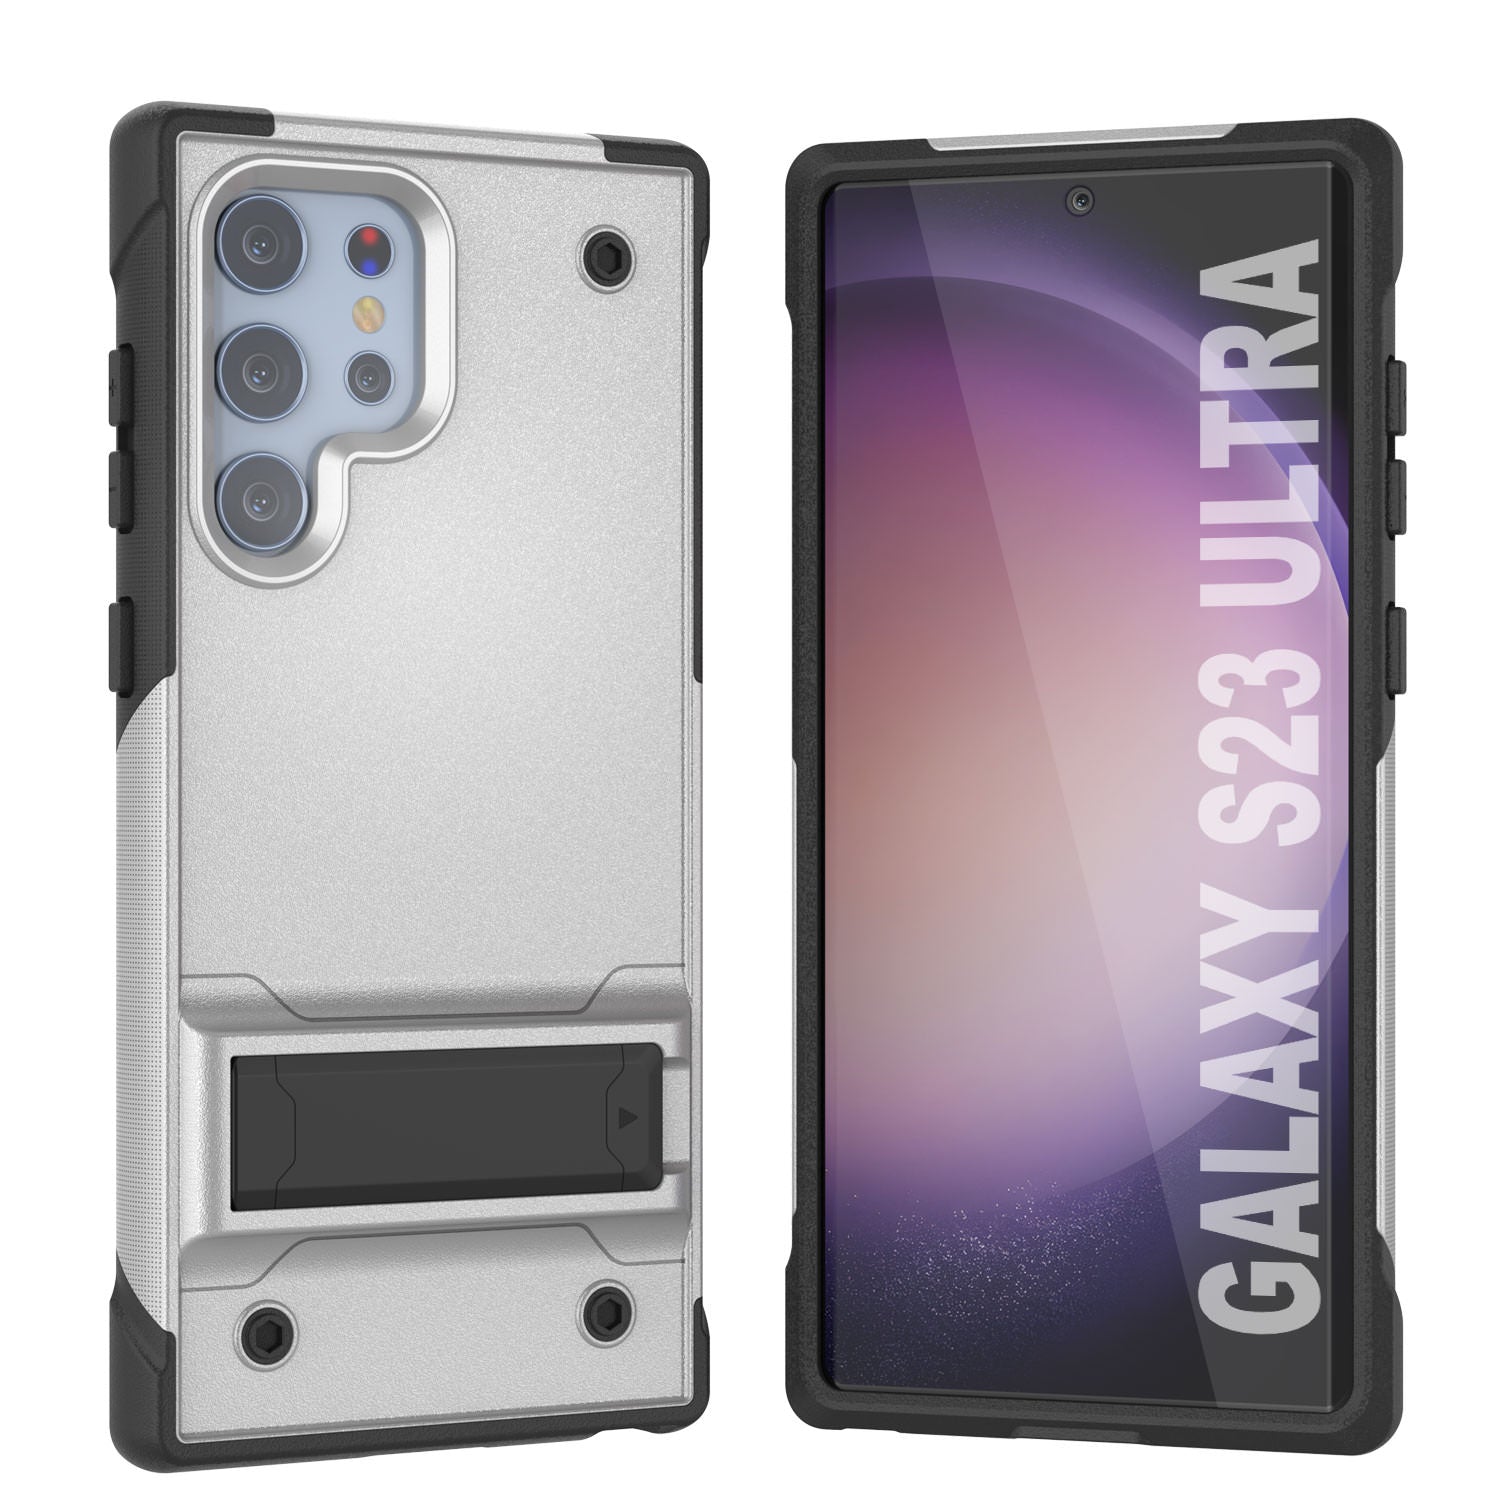 Punkcase Galaxy S23 Ultra Case [Reliance Series] Protective Hybrid Military Grade Cover W/Built-in Kickstand [White-Black]